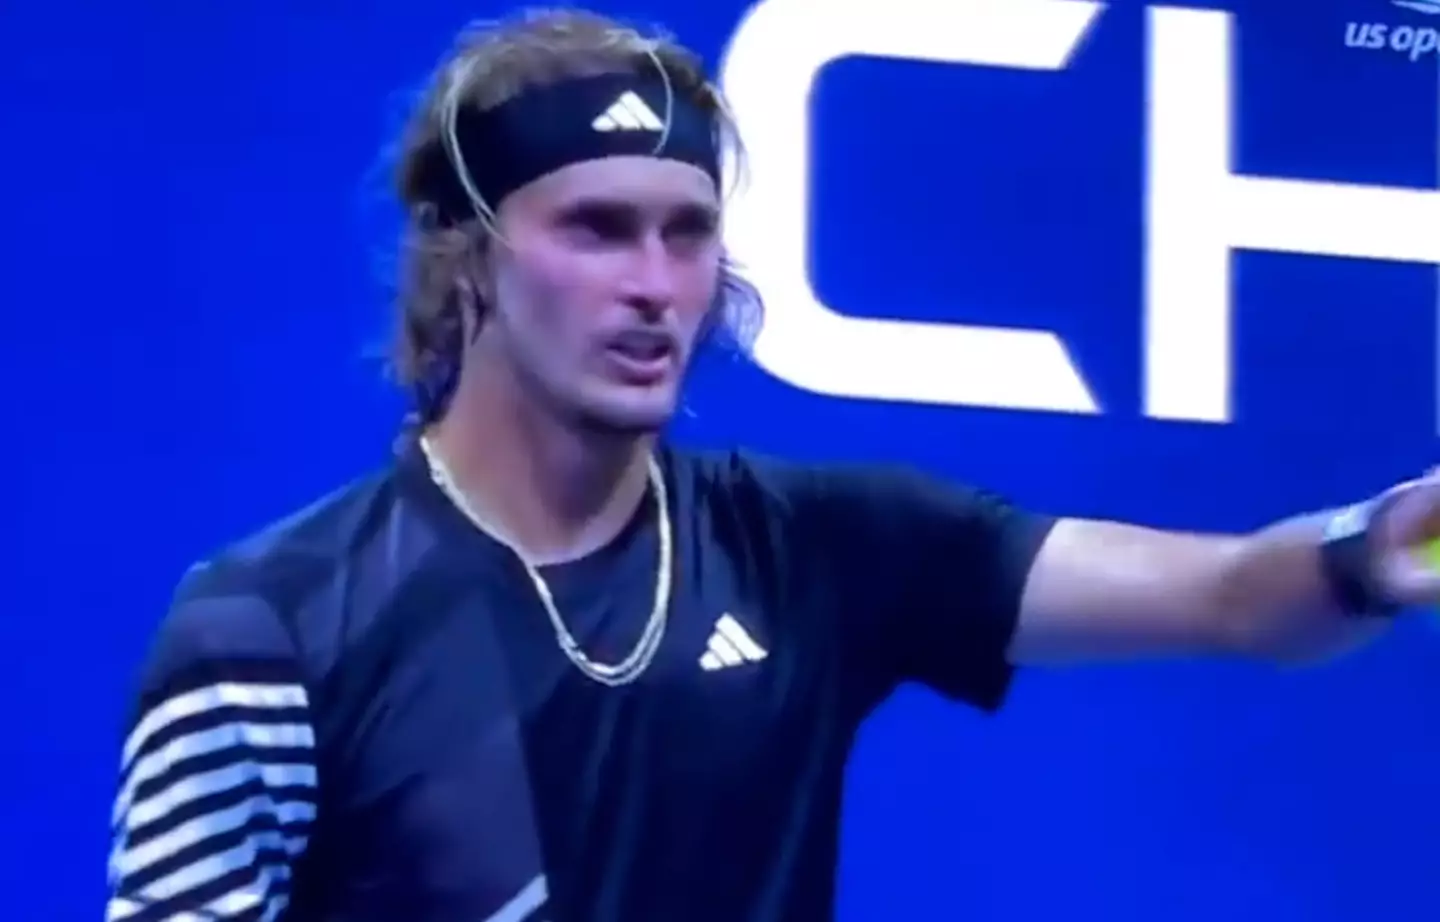 Alexander Zverev stopped the game to complain about a member of the audience.